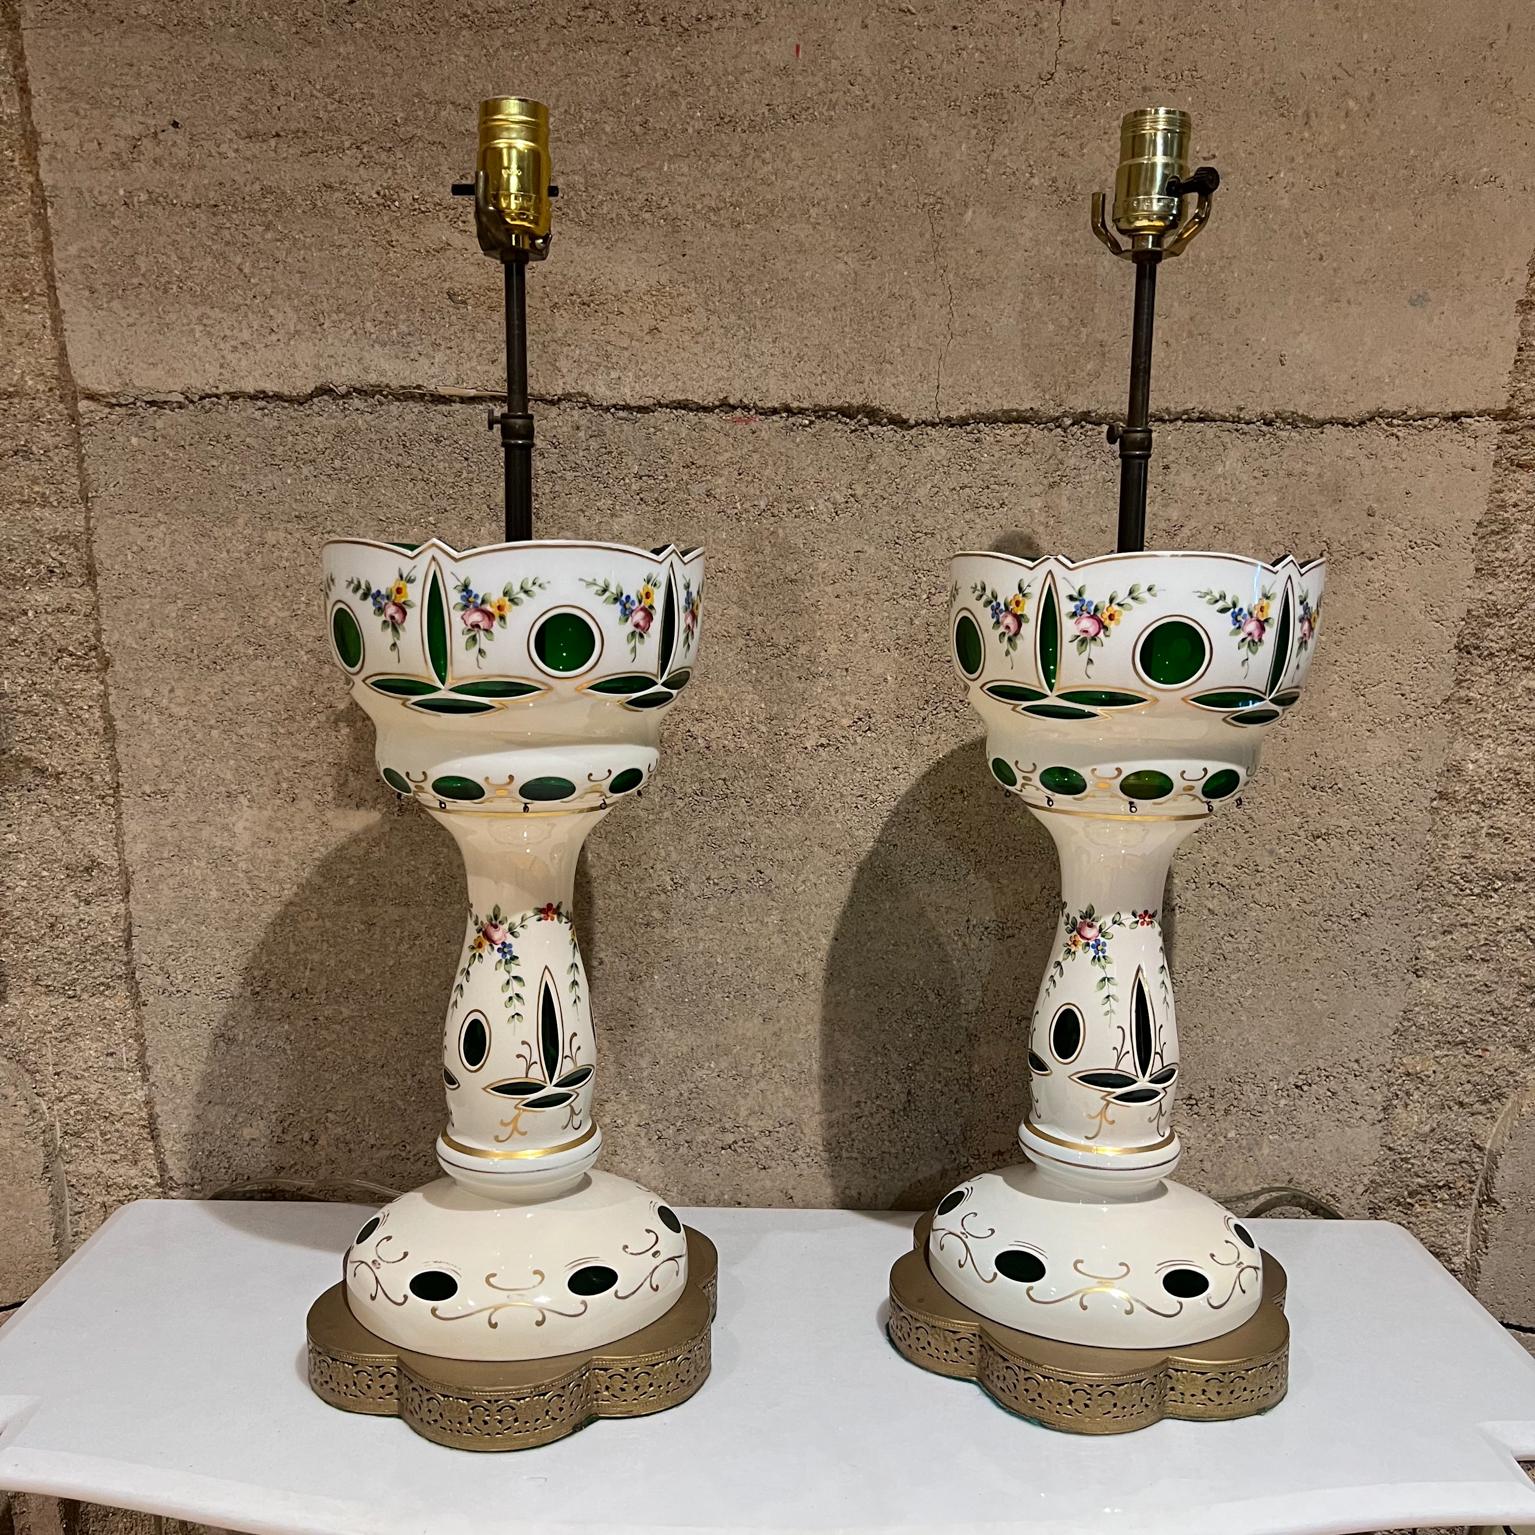 1950s Sculptural pair table lamps white gold and green glass floral hand paint
Vintage Bohemian Czech case glass
Measures: 24 tall to socket x 8 diameter 35 to top of finial
Preowned original vintage condition unrestored. No shades